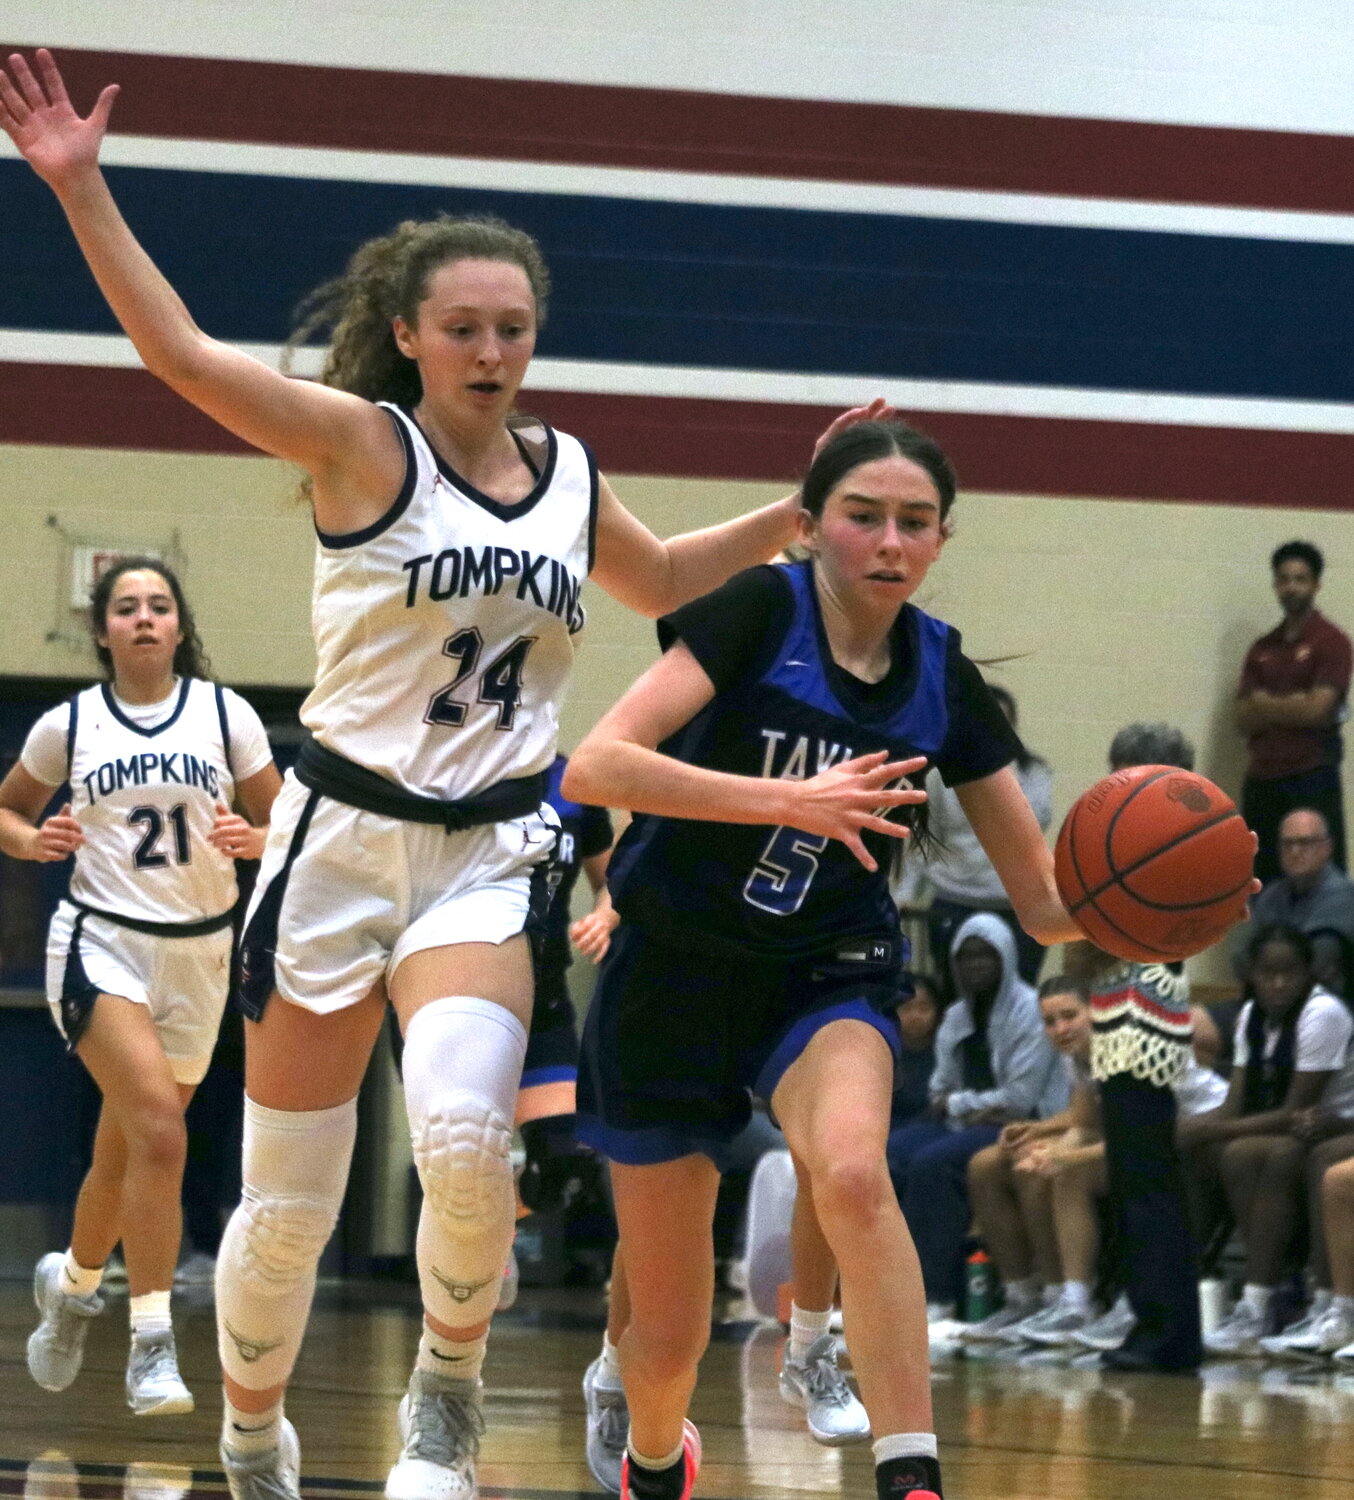 Casey Scherpereel dribbles up the court during Friday's game between Taylor and Tompkins at the Tompkins gym.